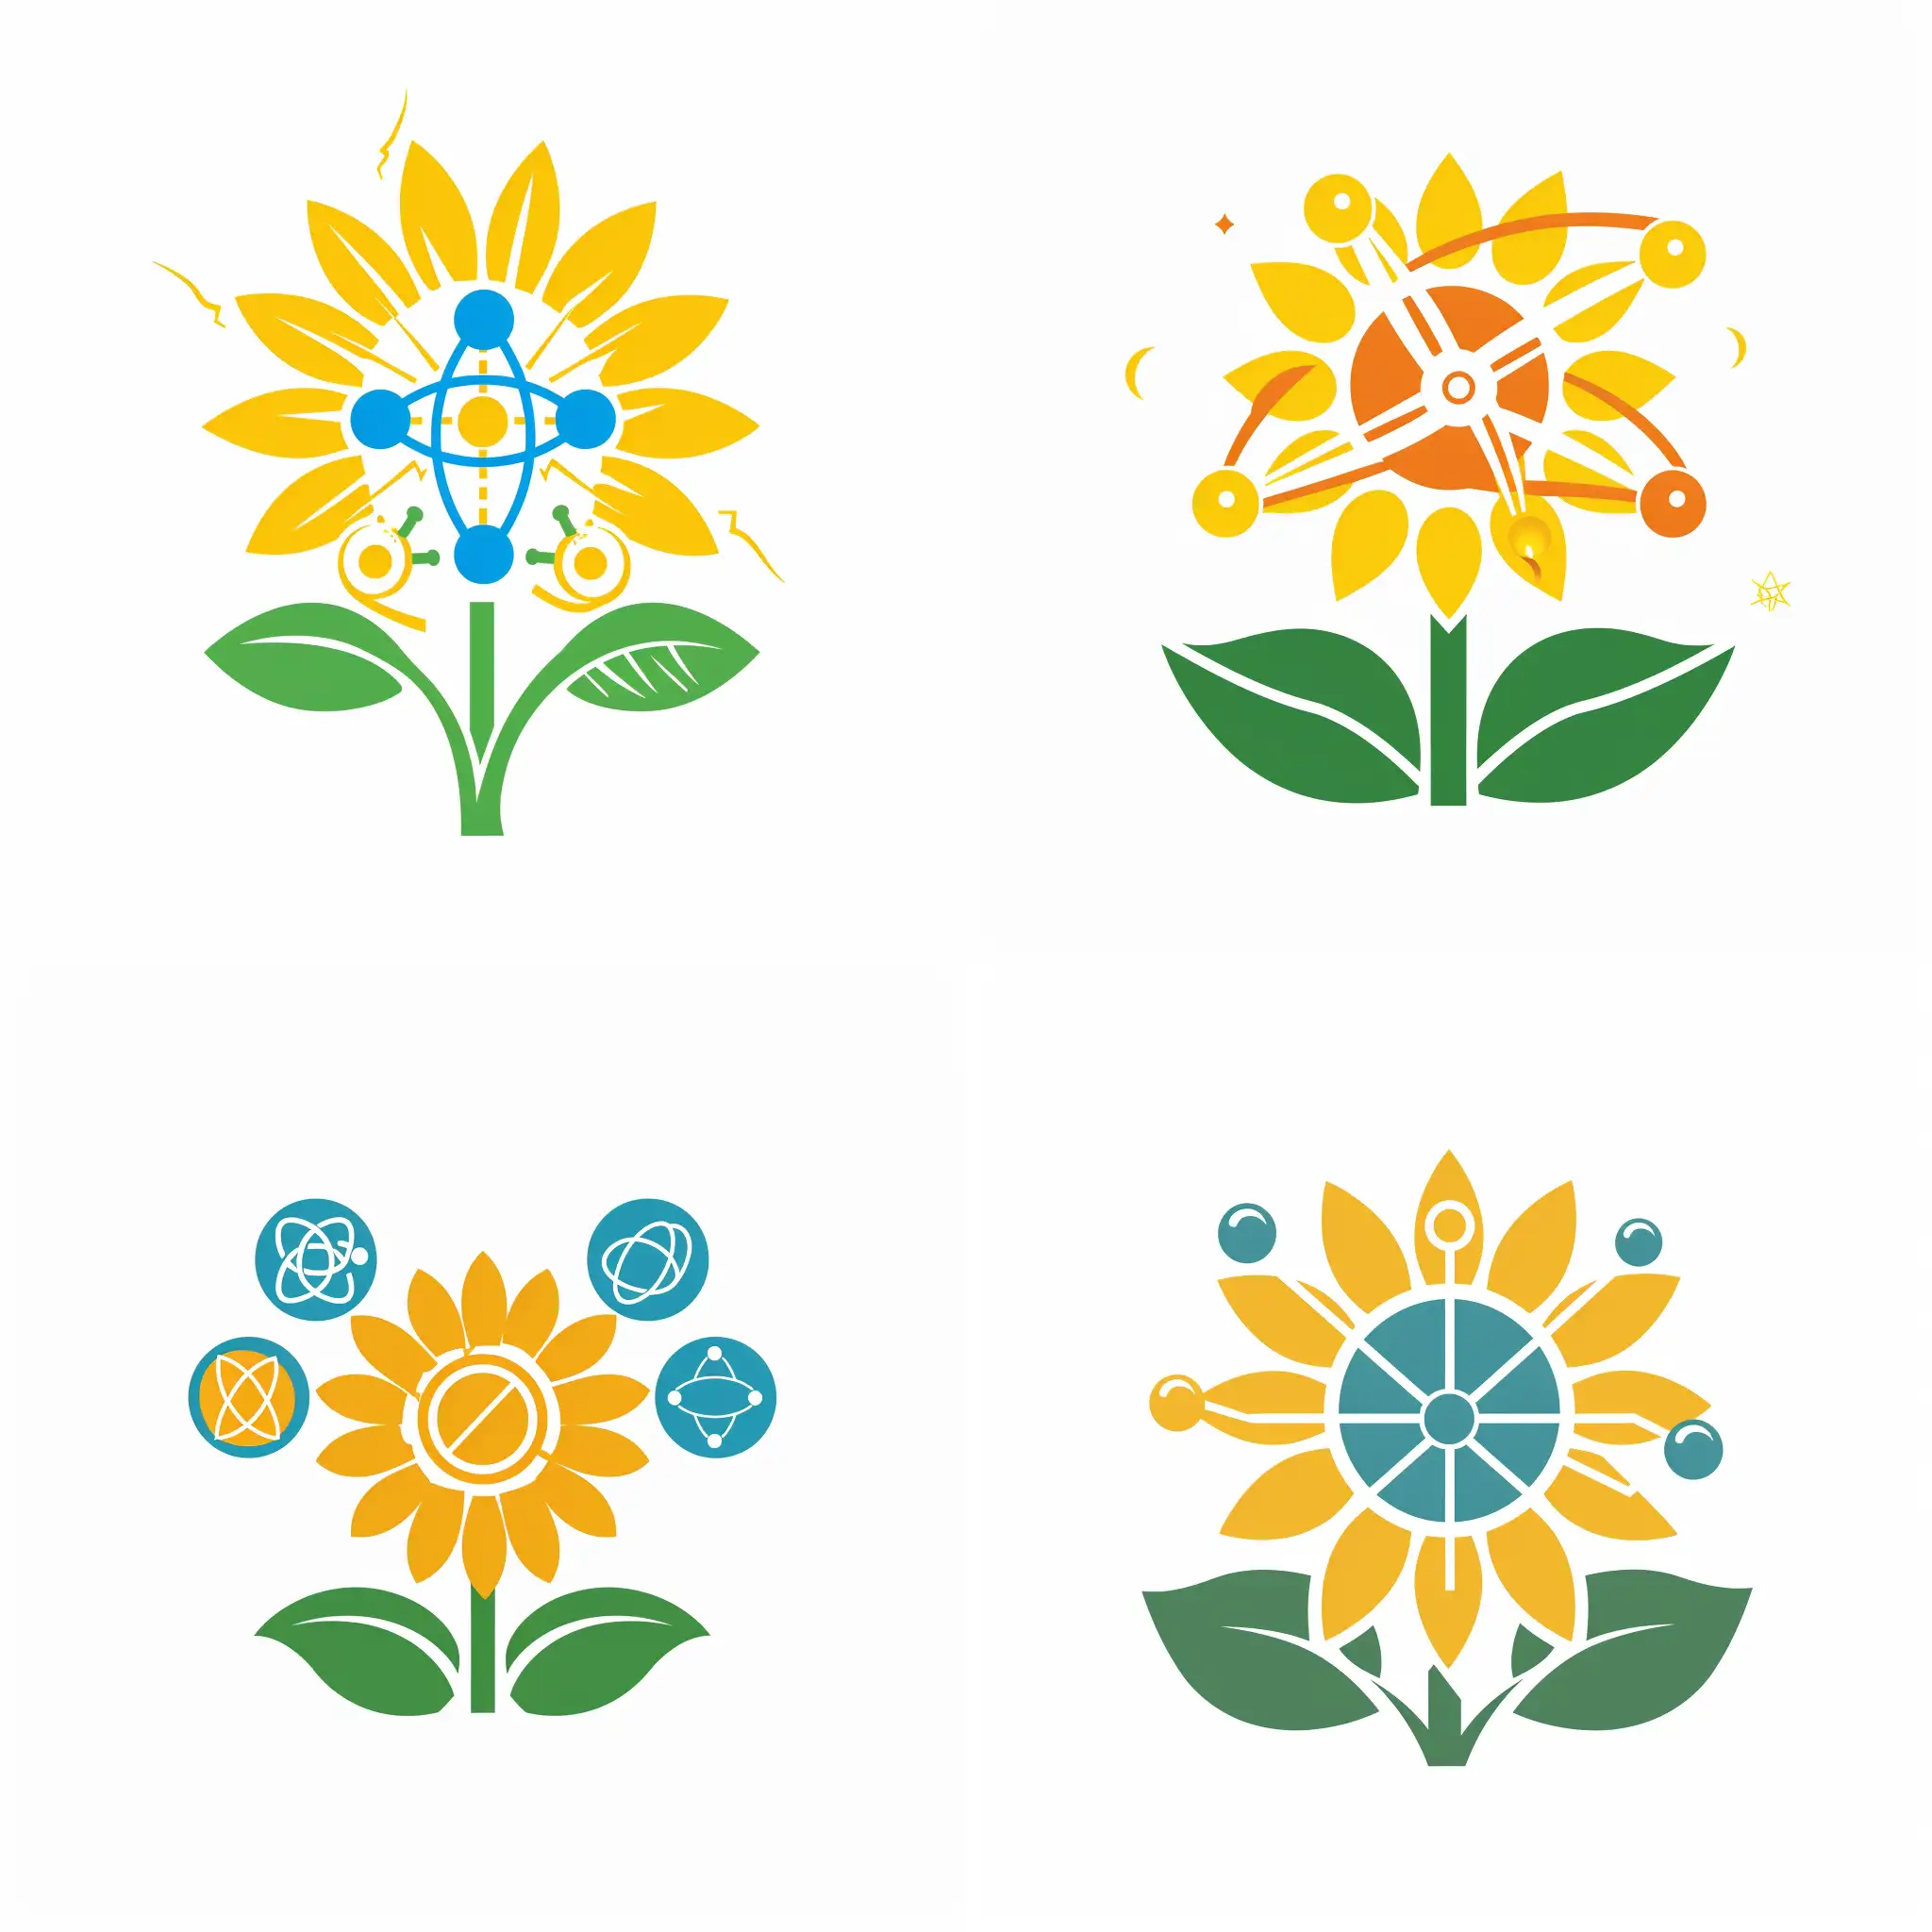 Logo design with 4 colors with the following elements environment (sunflower) Chemical substance (preferably atomic structure) Energy production from plants Clean energy and fuel refinery pollutants clean air (sky) environment (plant, preferably sunflower) Chemical substance (preferably atomic structure) Energy production from plants Clean energy and fuel refinery pollutants clean air (sky)